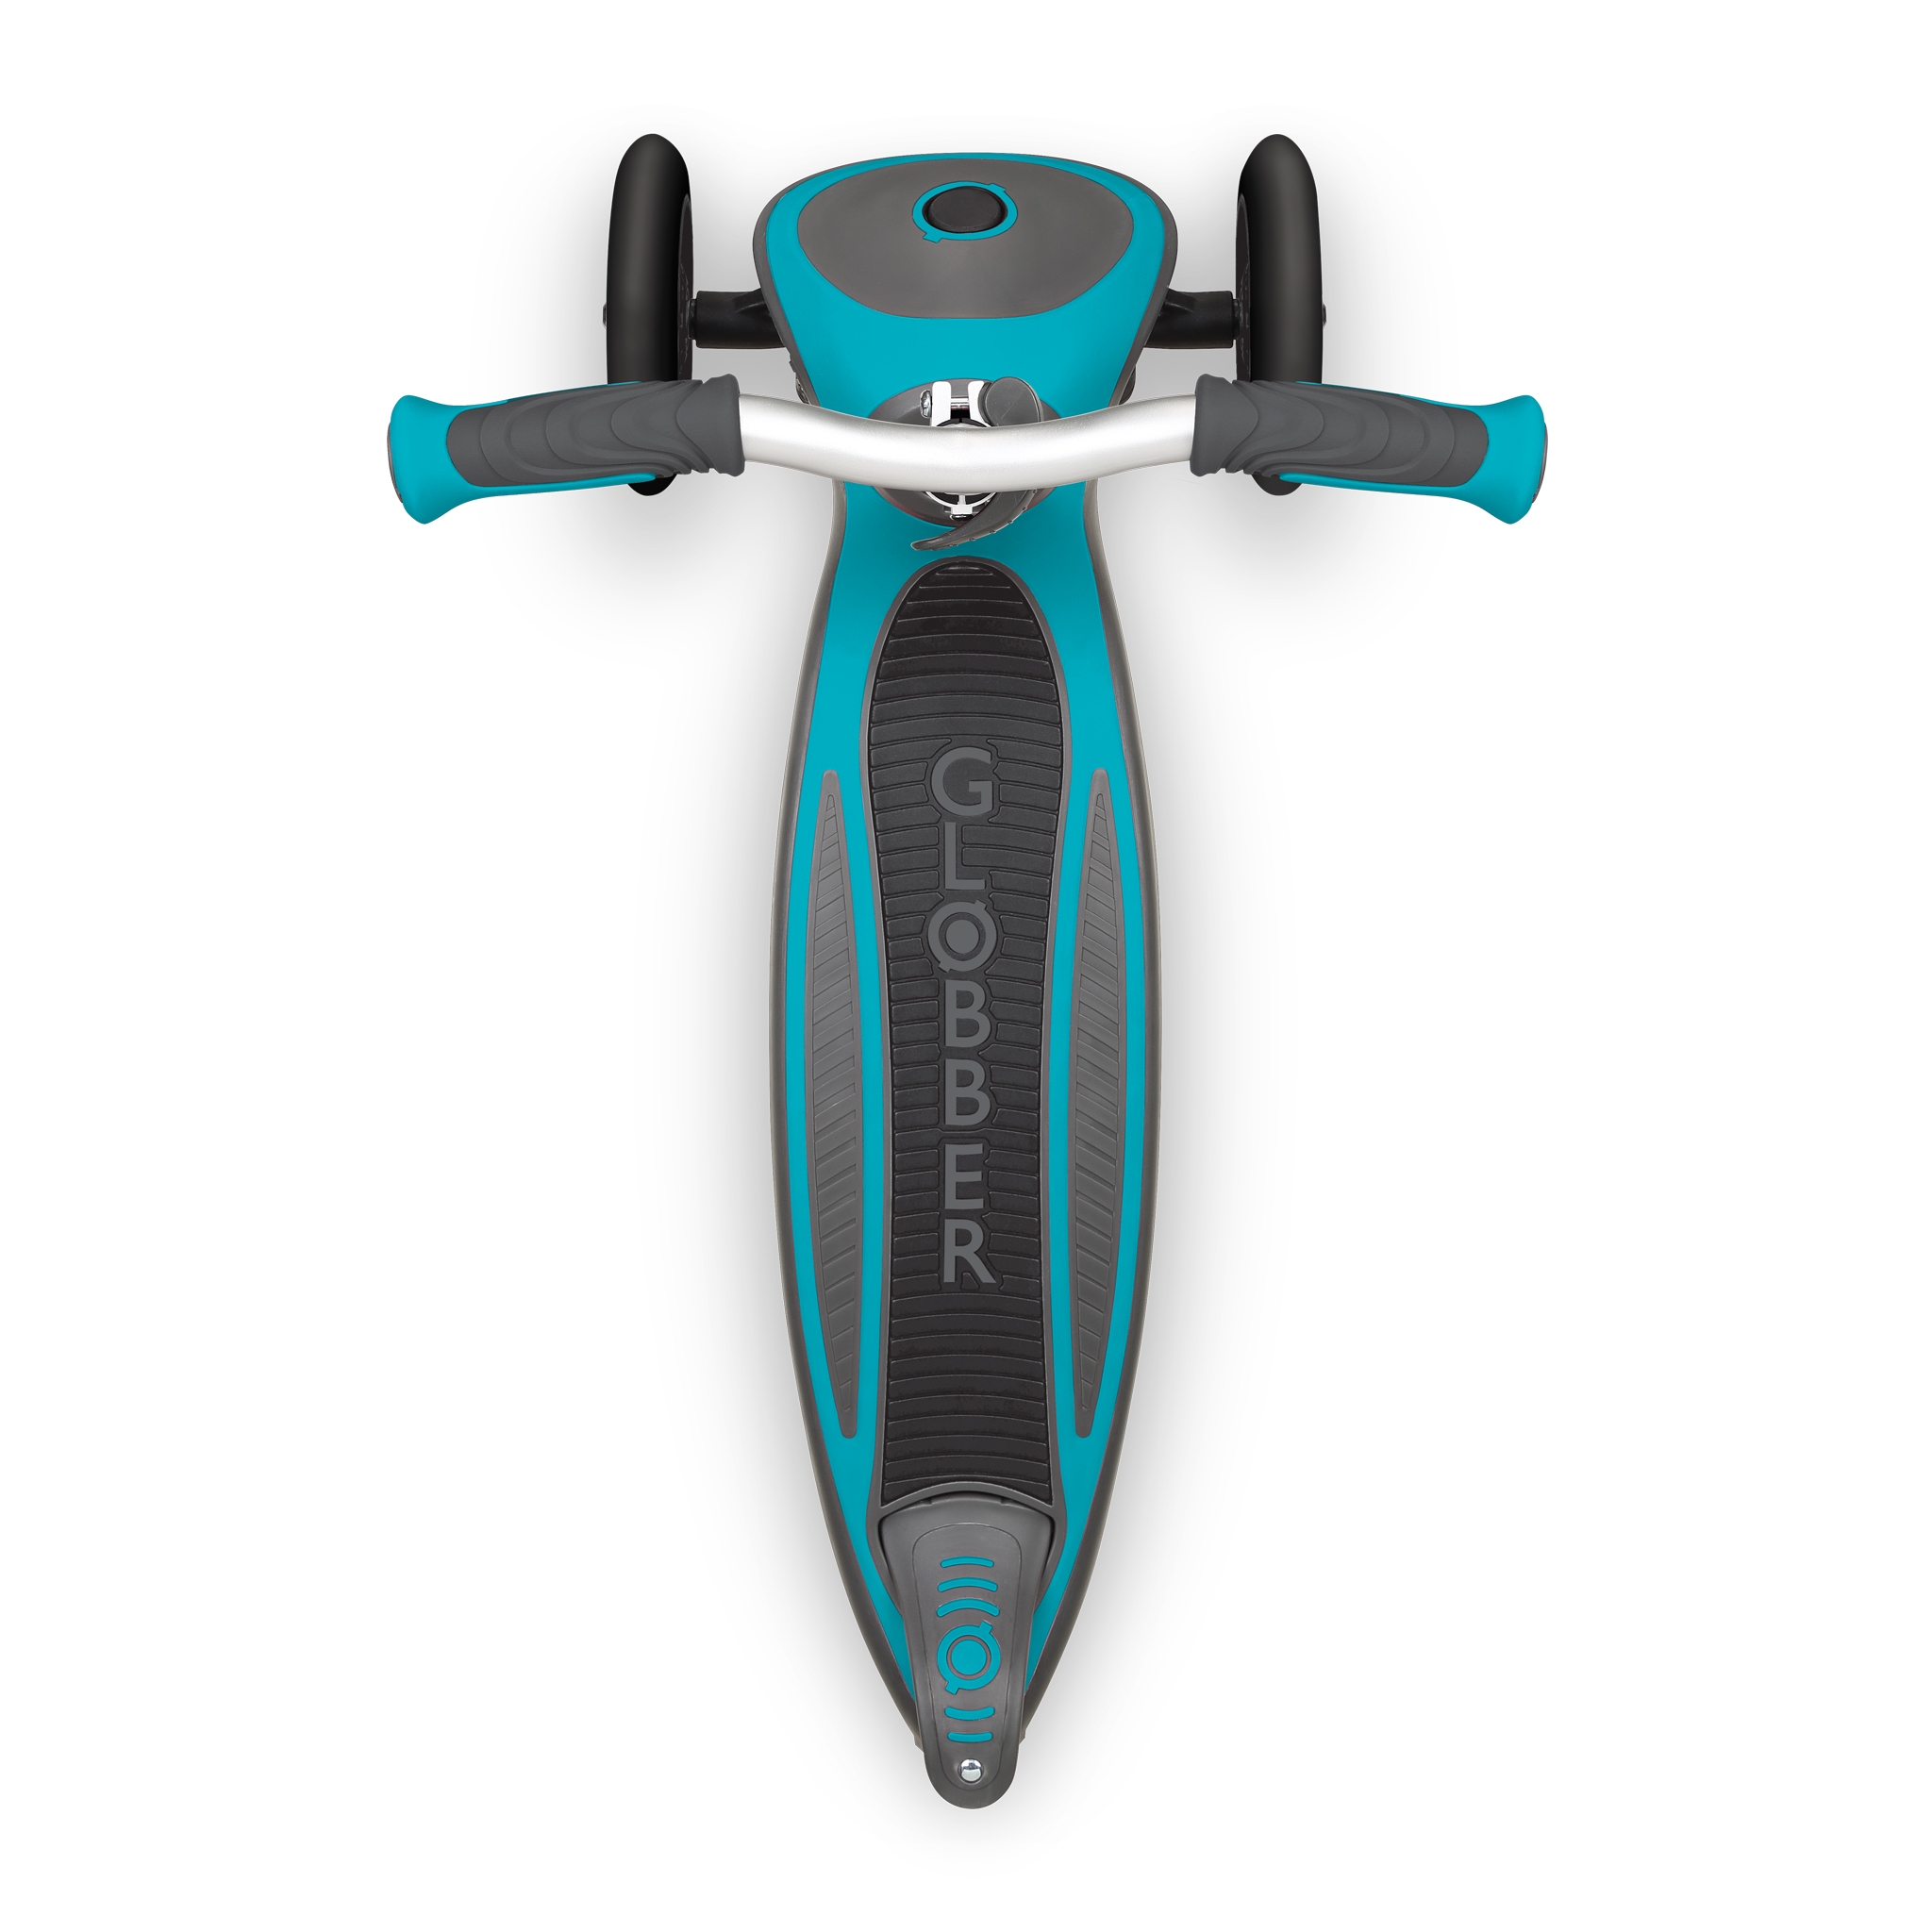 Globber-MASTER-3-wheel-foldable-scooter-for-kids-with-extra-wide-anti-slip-deck-for-comfortable-rides_teal 0